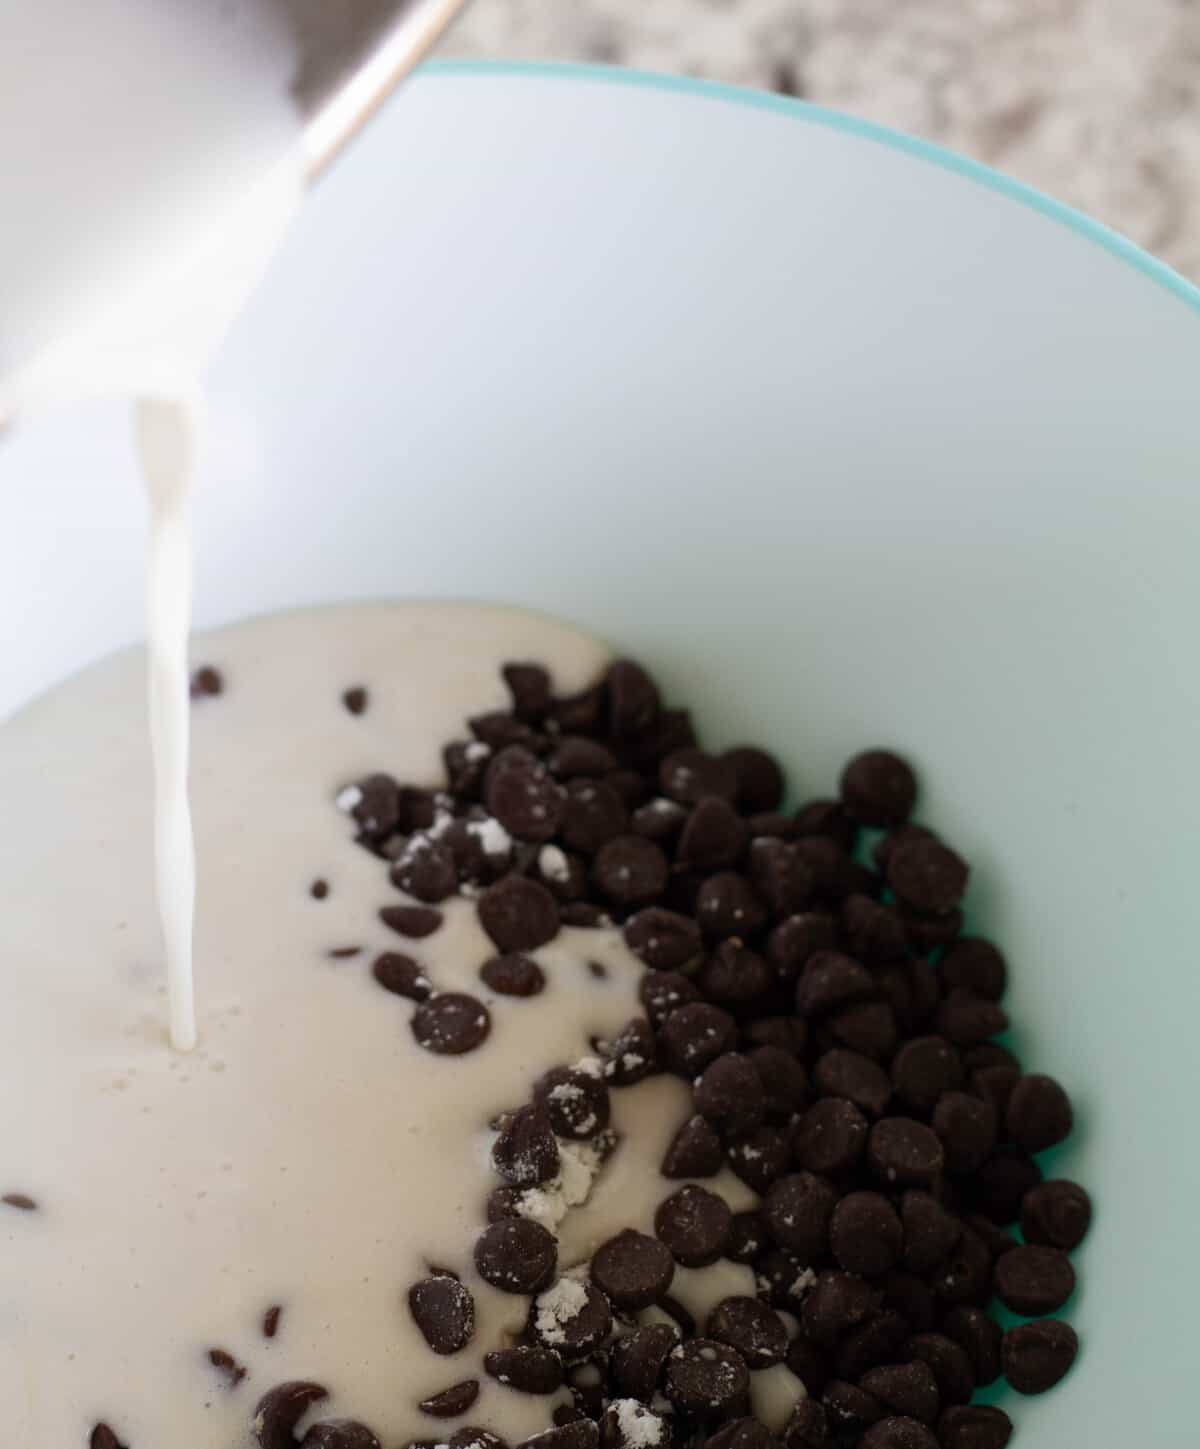 Pouring cream over chocolate chips